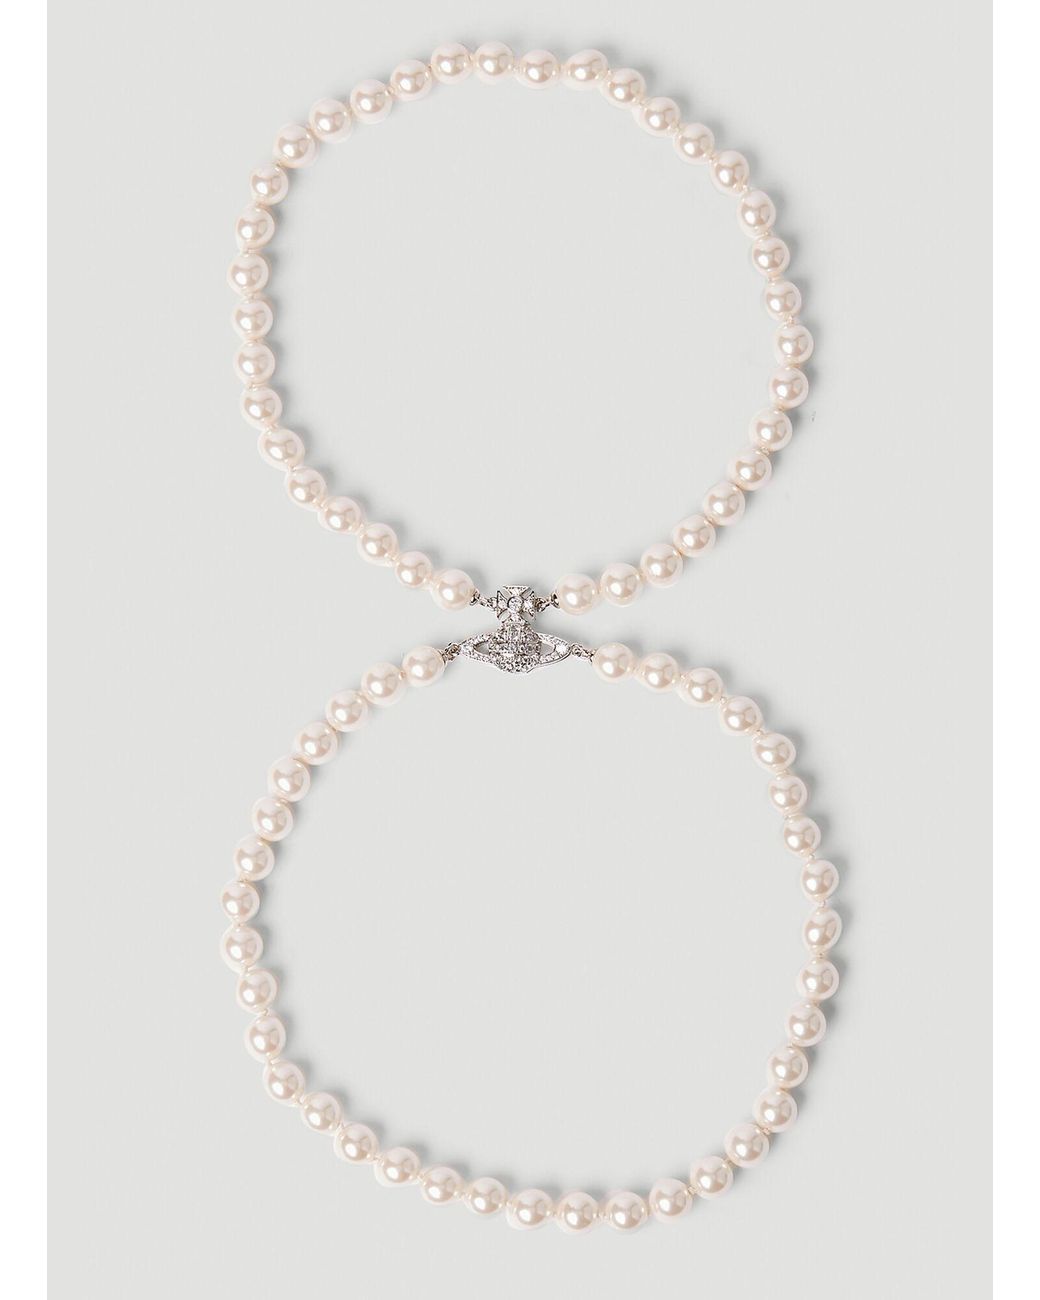 Vivienne Westwood Graziella Pearl Choker Necklace in Natural | Lyst